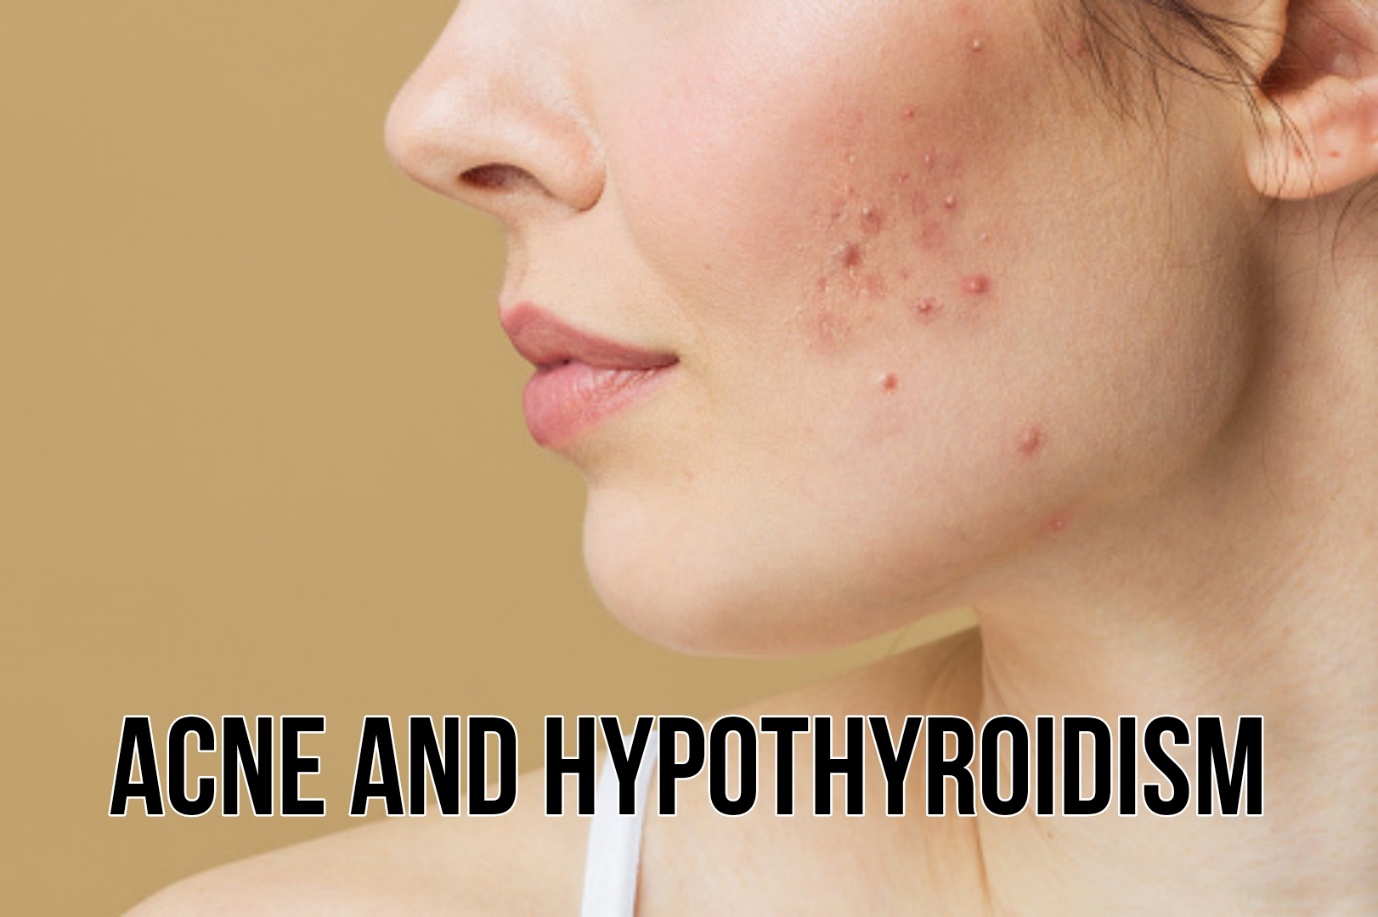 Acne and Hypothyroidism – Relation